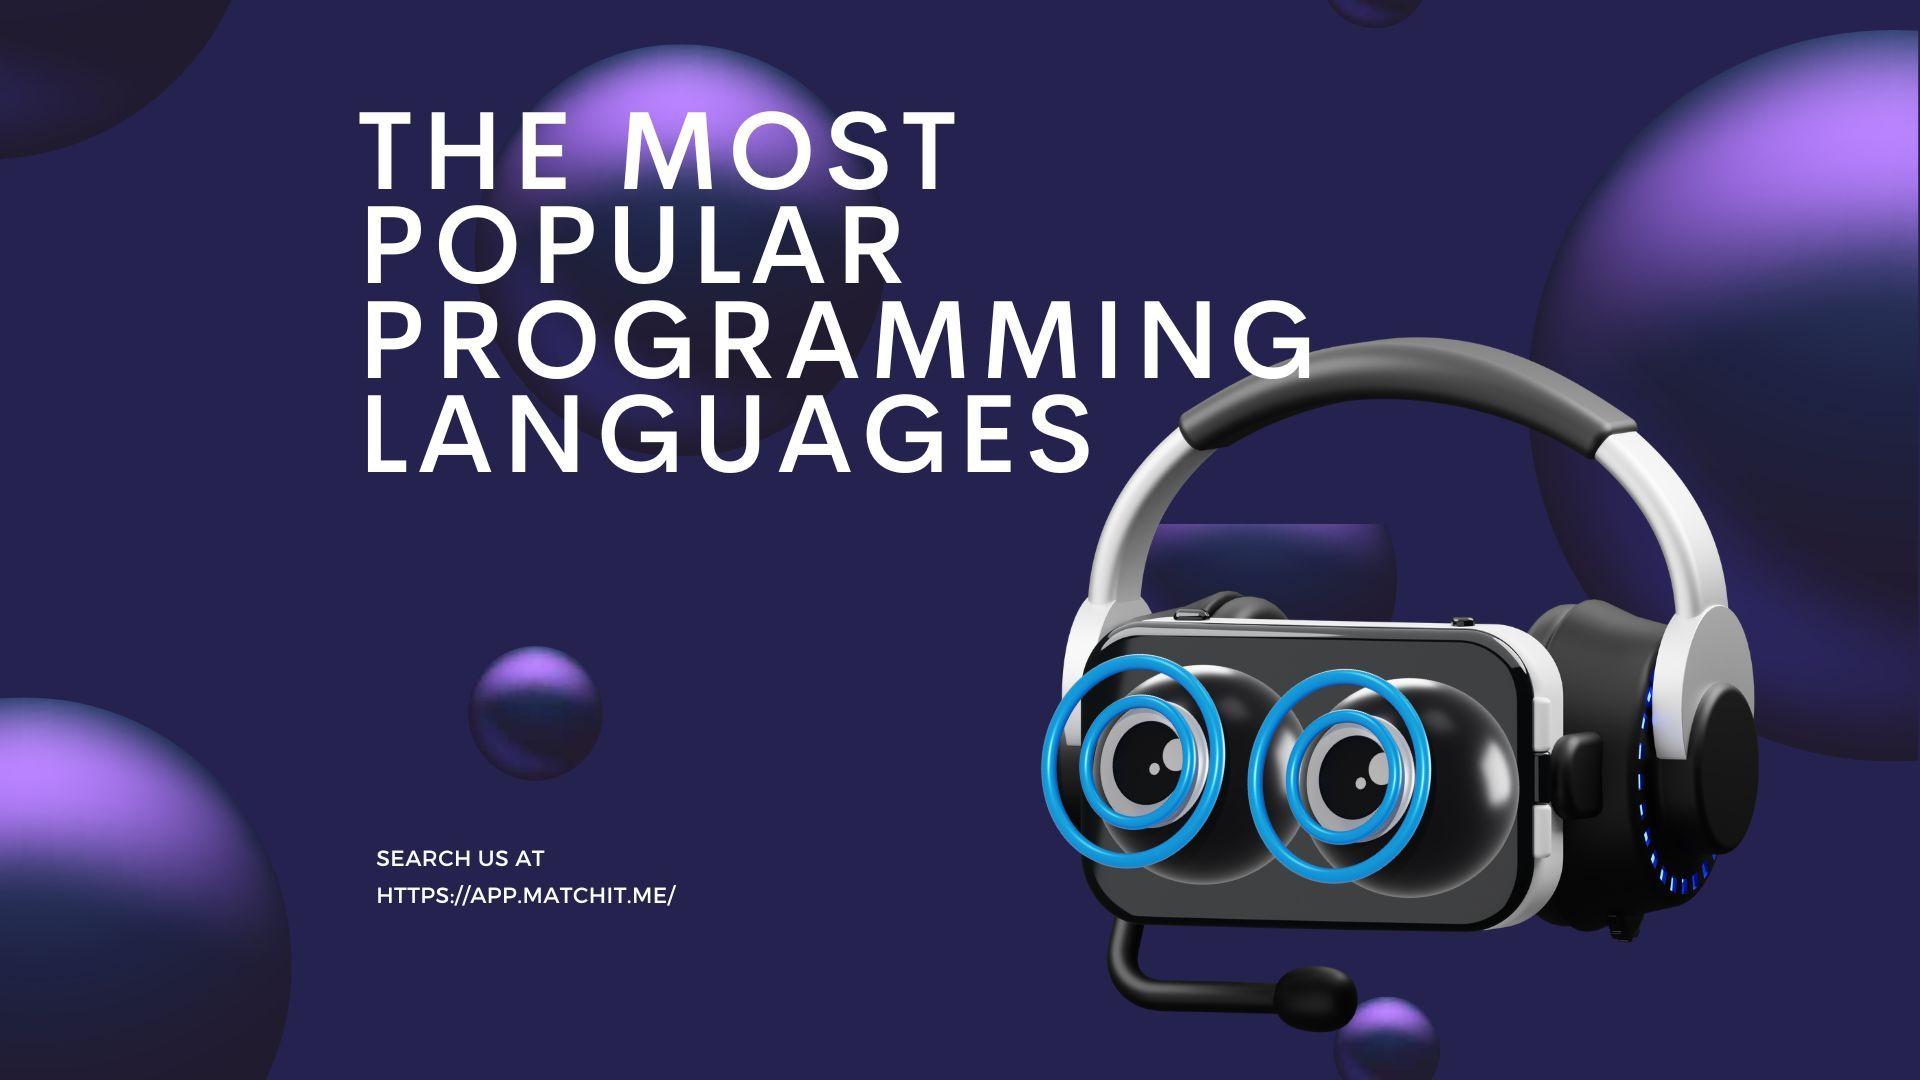 The most  popular programming languages